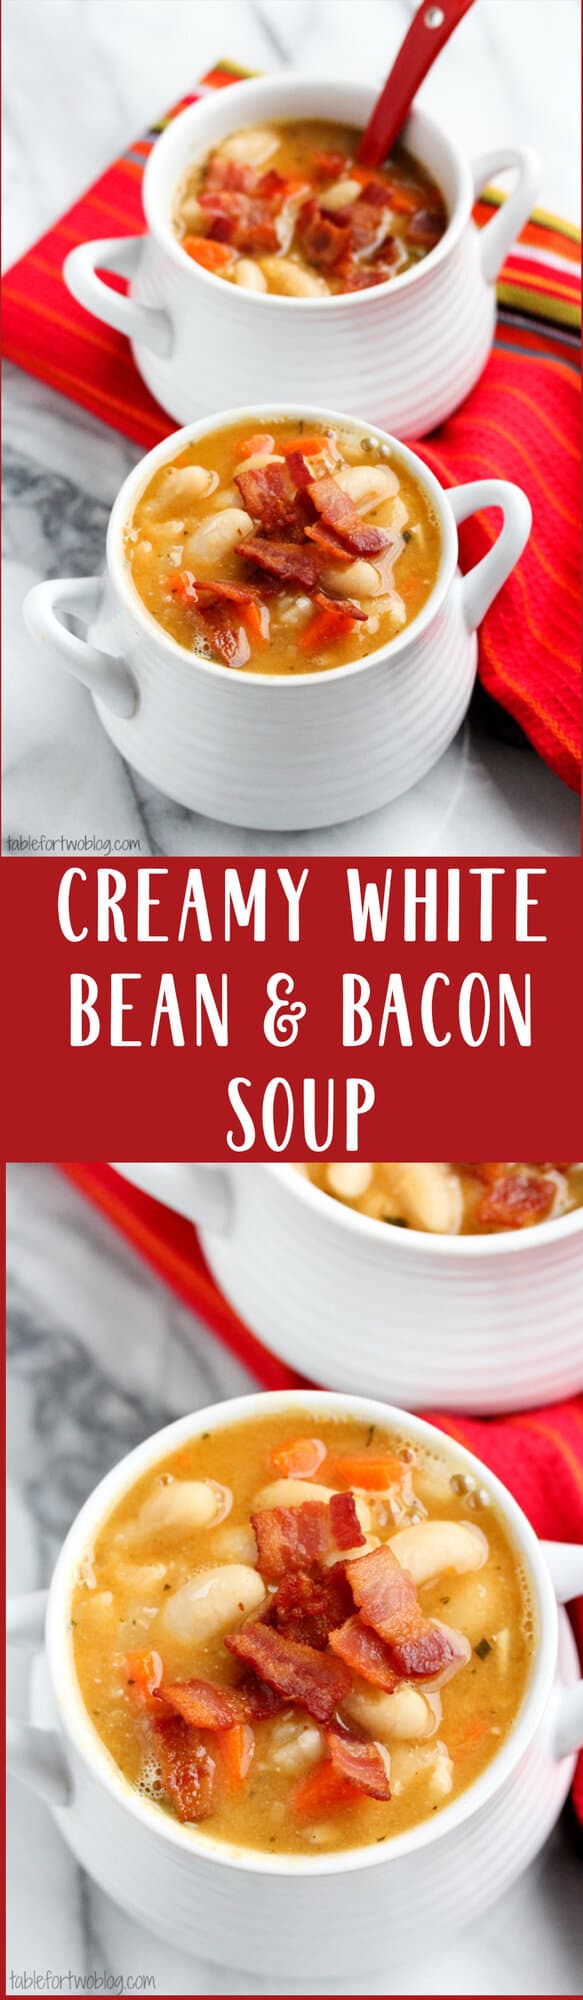 Creamy white bean and bacon soup will warm you right up! The flavors are INCREDIBLE!